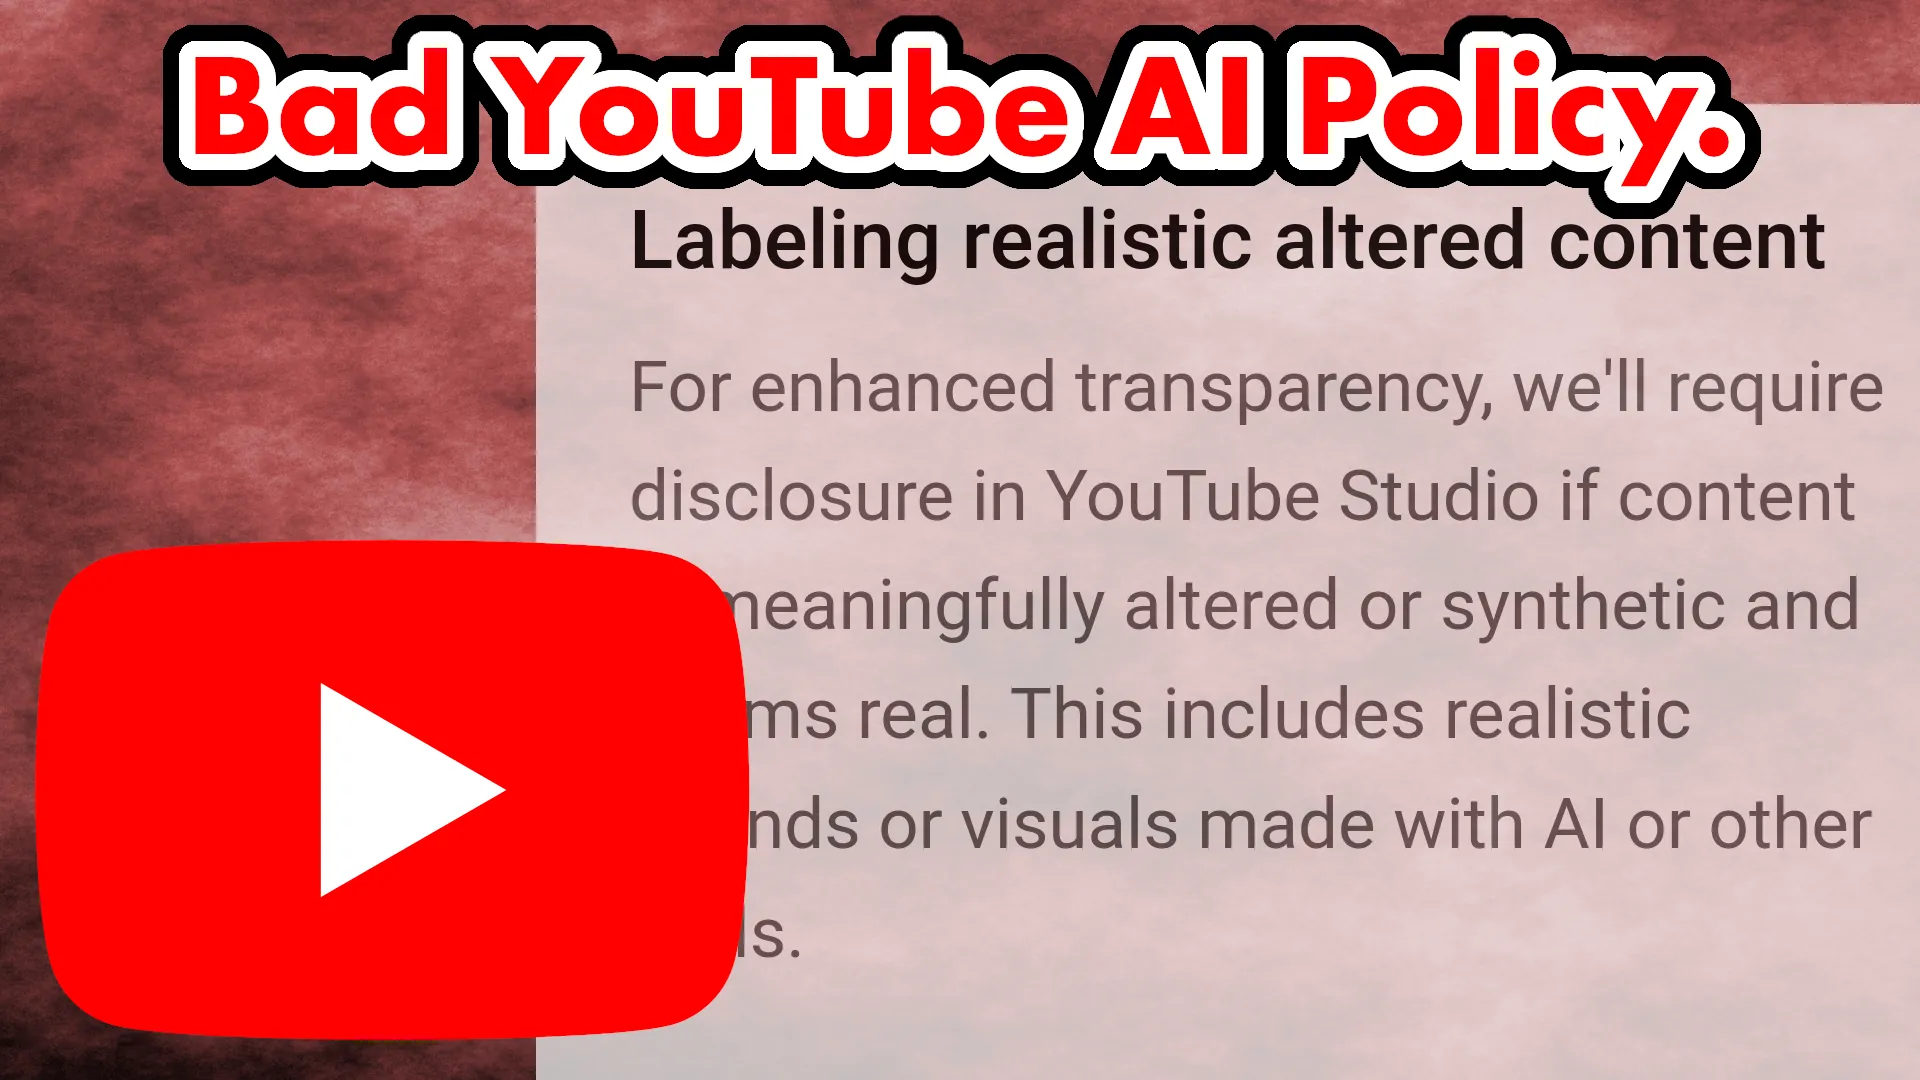 A thumbnail summarizing the article. It says "Bad YouTube AI Policy" and has the YouTube logo on it and a copy of the policy announcement in the background.